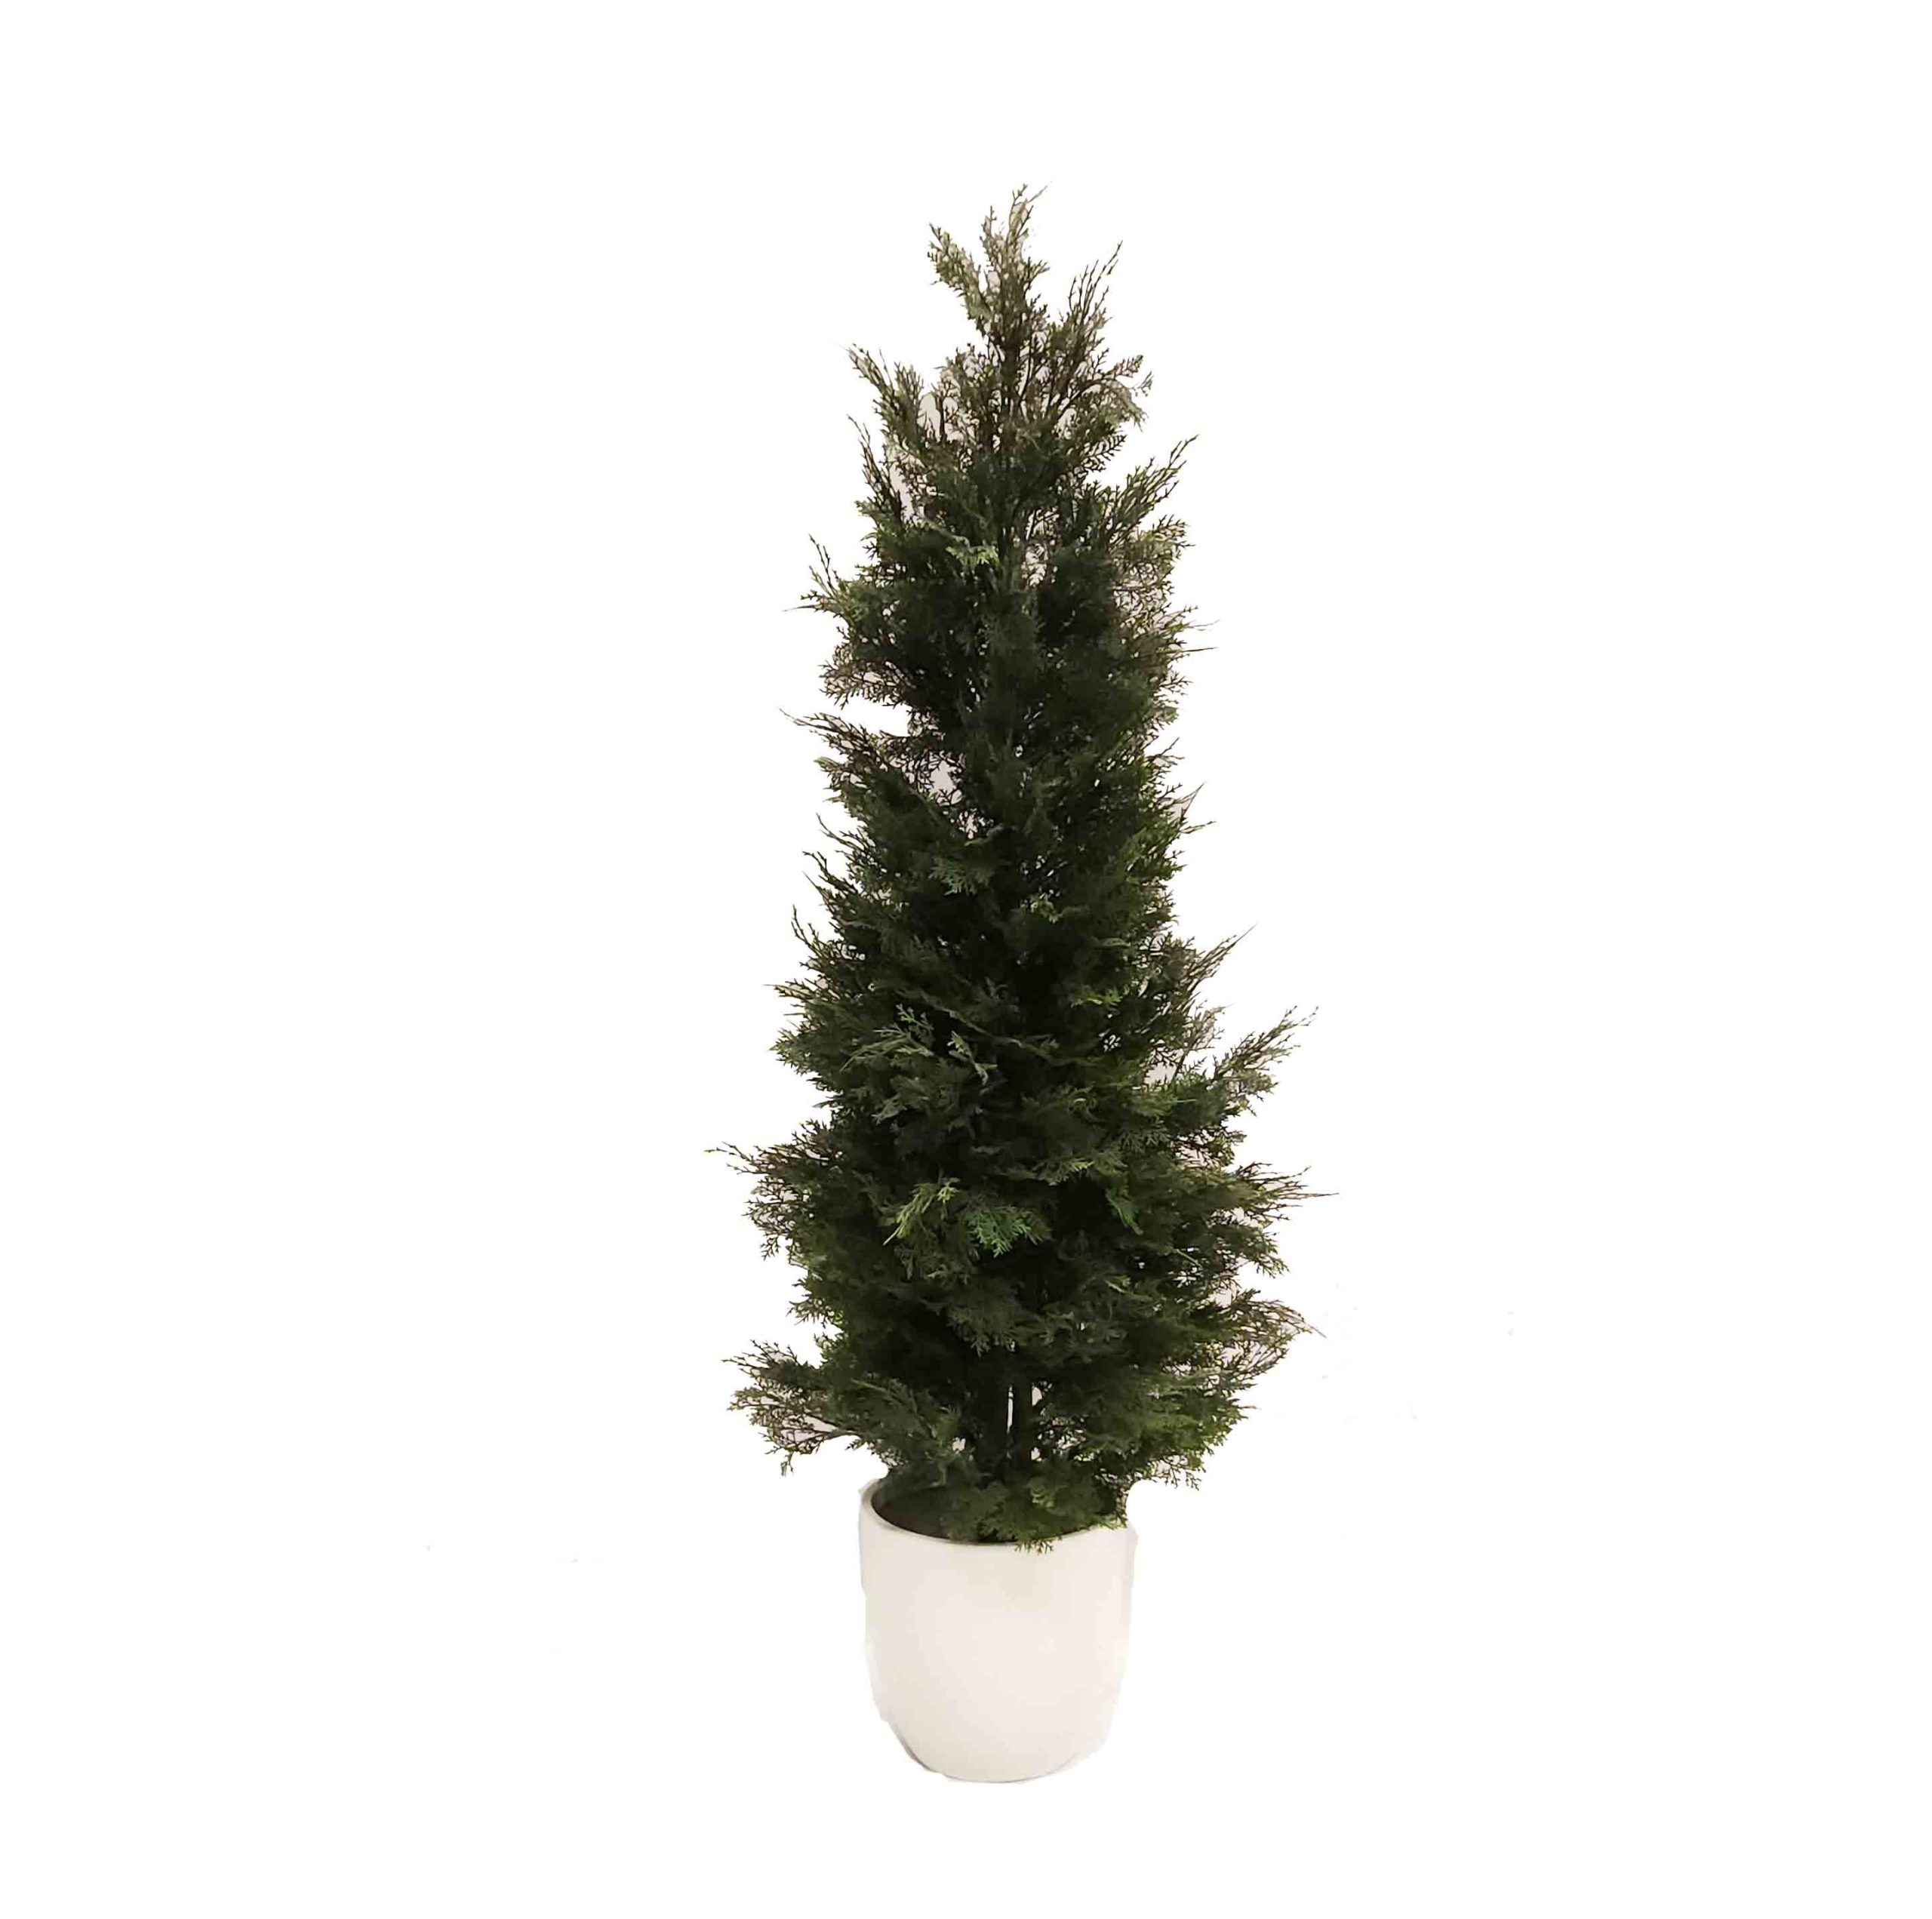 artificial outdoor plant | cypress tree | conifer tree | fake cypress tree | artificial conifer tree | UV treated plants | faux cypress tree | artificial plants